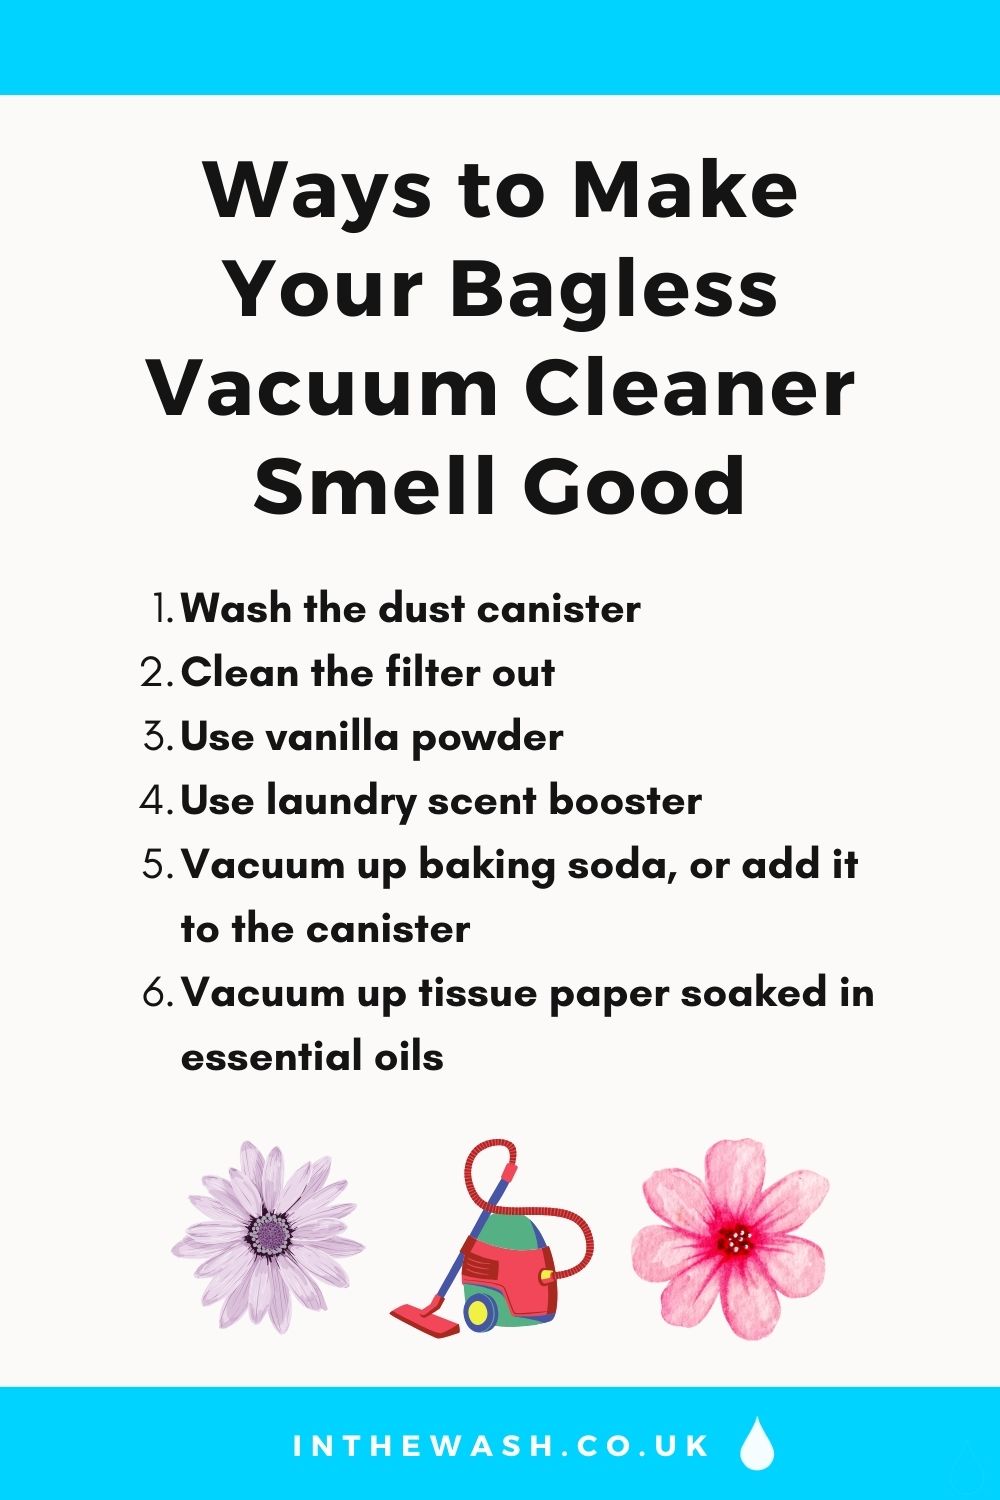 How to make your bagless vacuum cleaner smell good